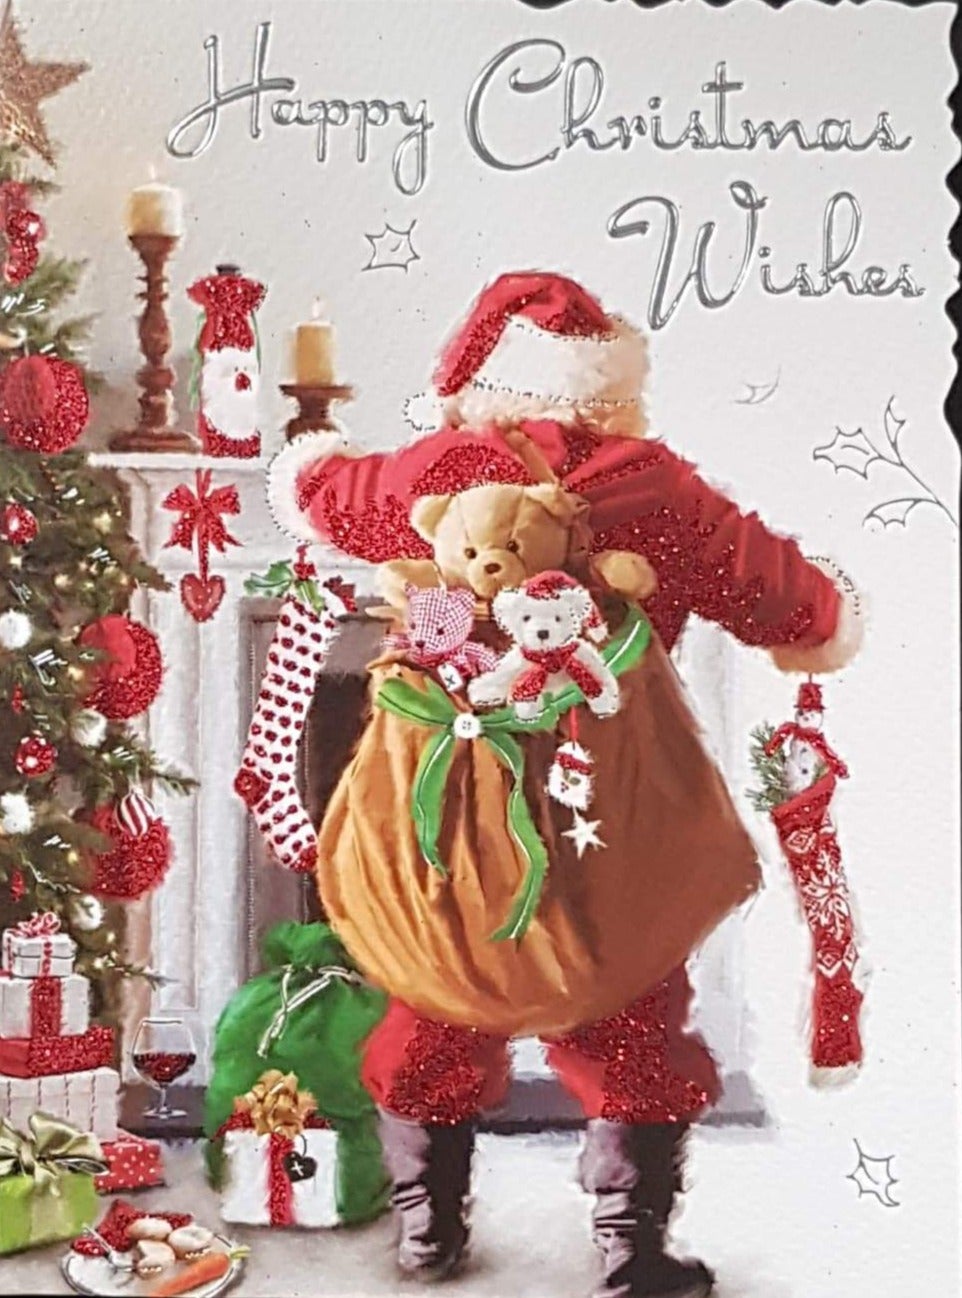 General Christmas Card - Happy Christmas Wishes & Santa Carrying Sack of Toys